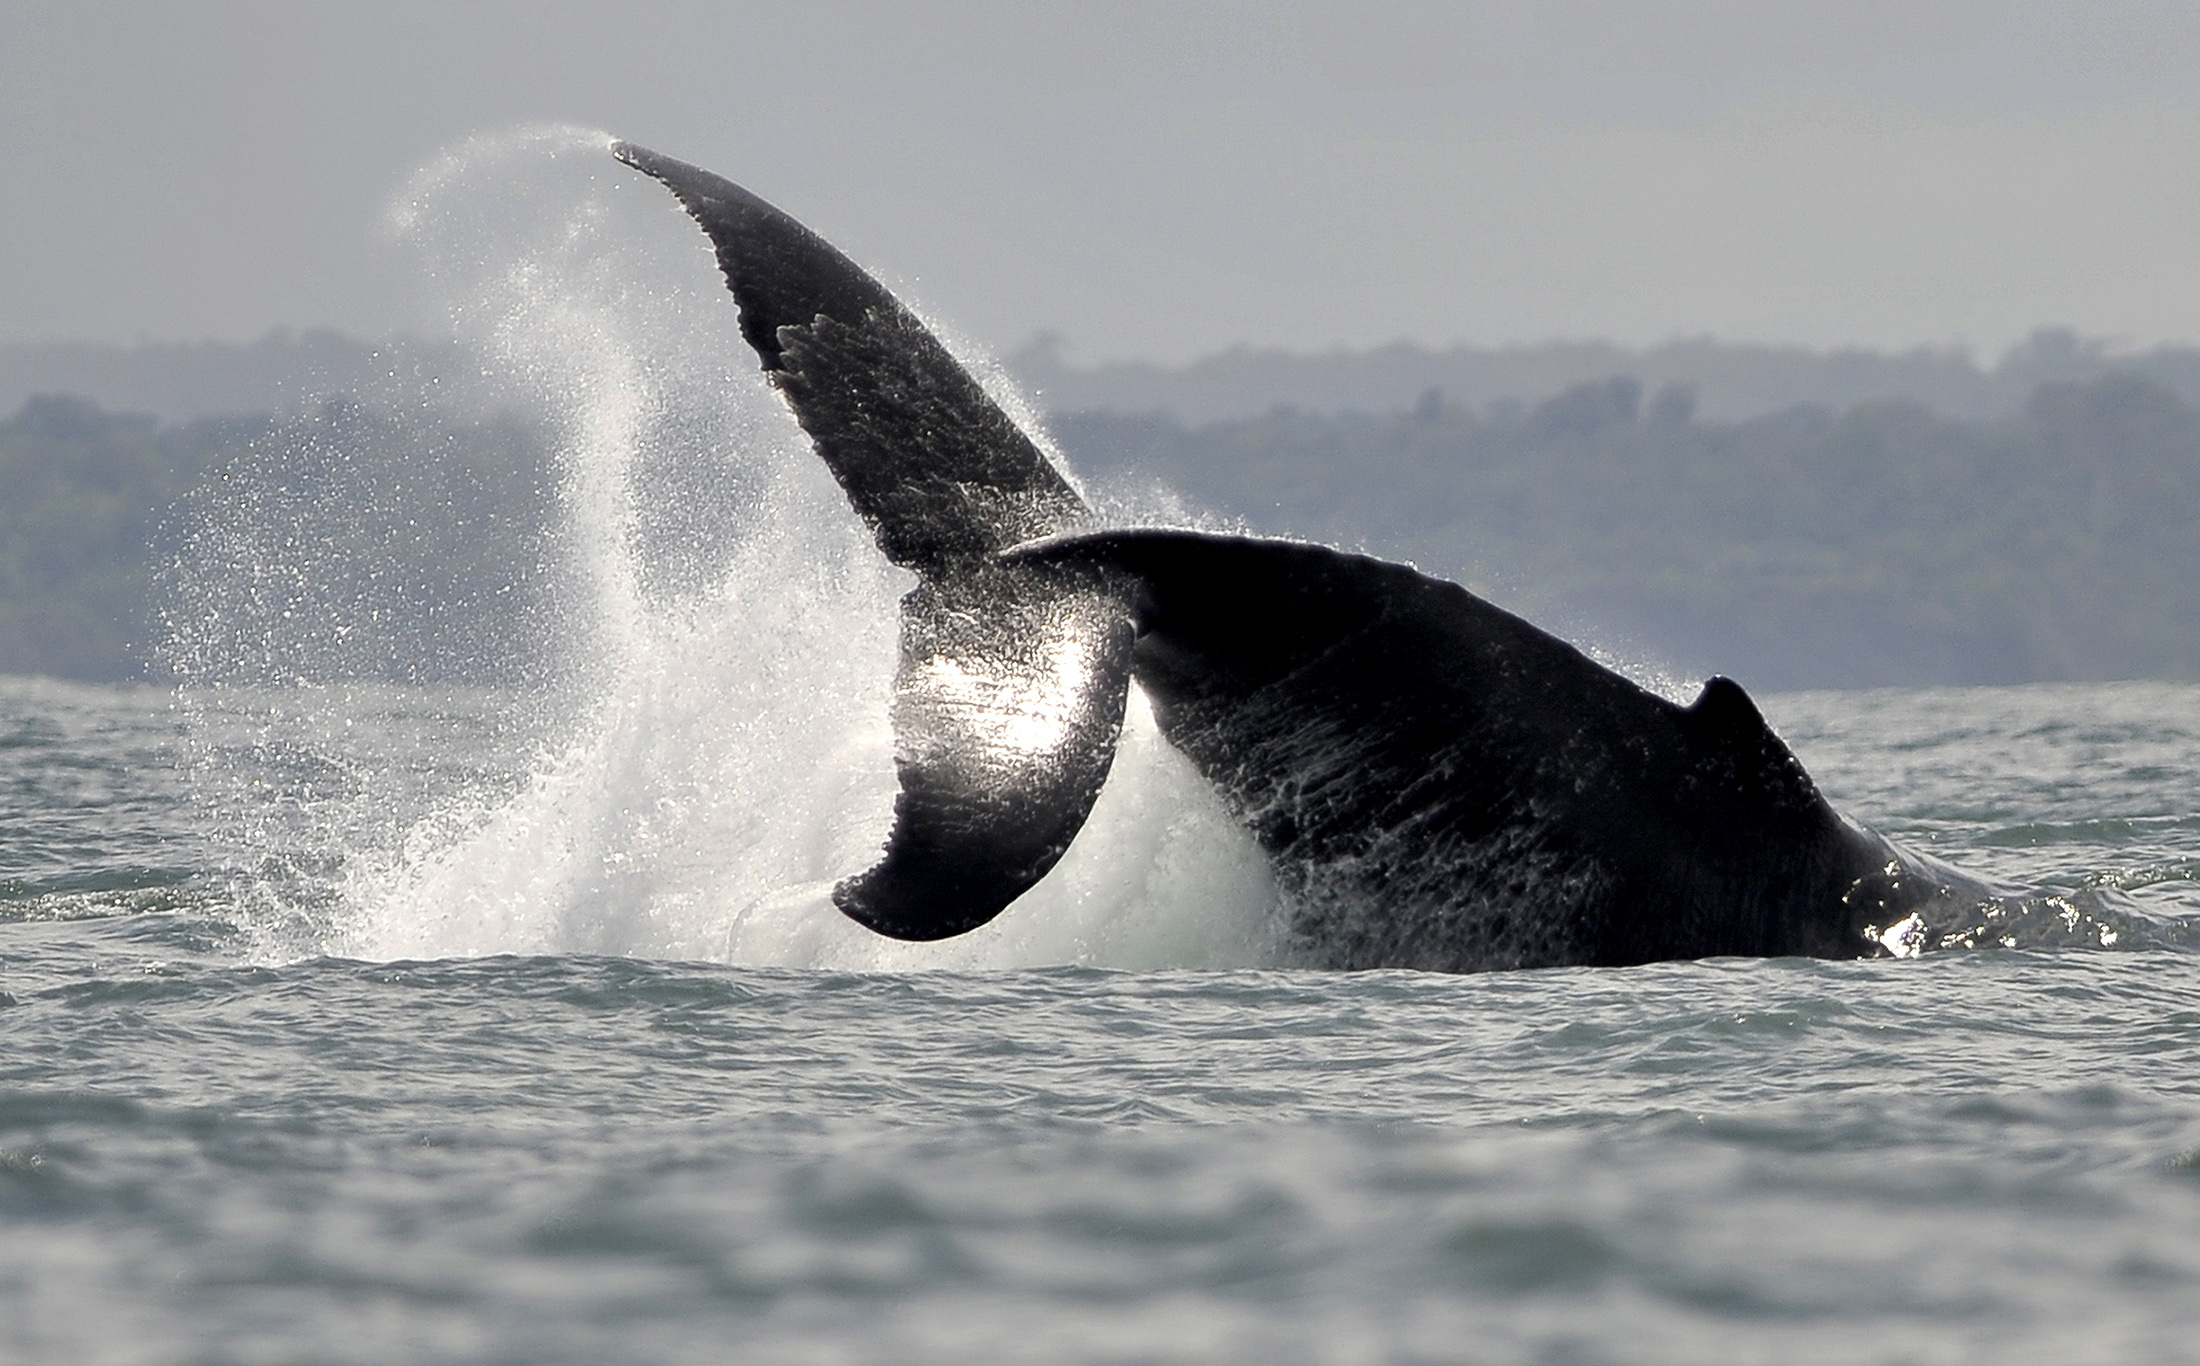 A Humpback whale jumps in the waters of the Pacific Ocean.